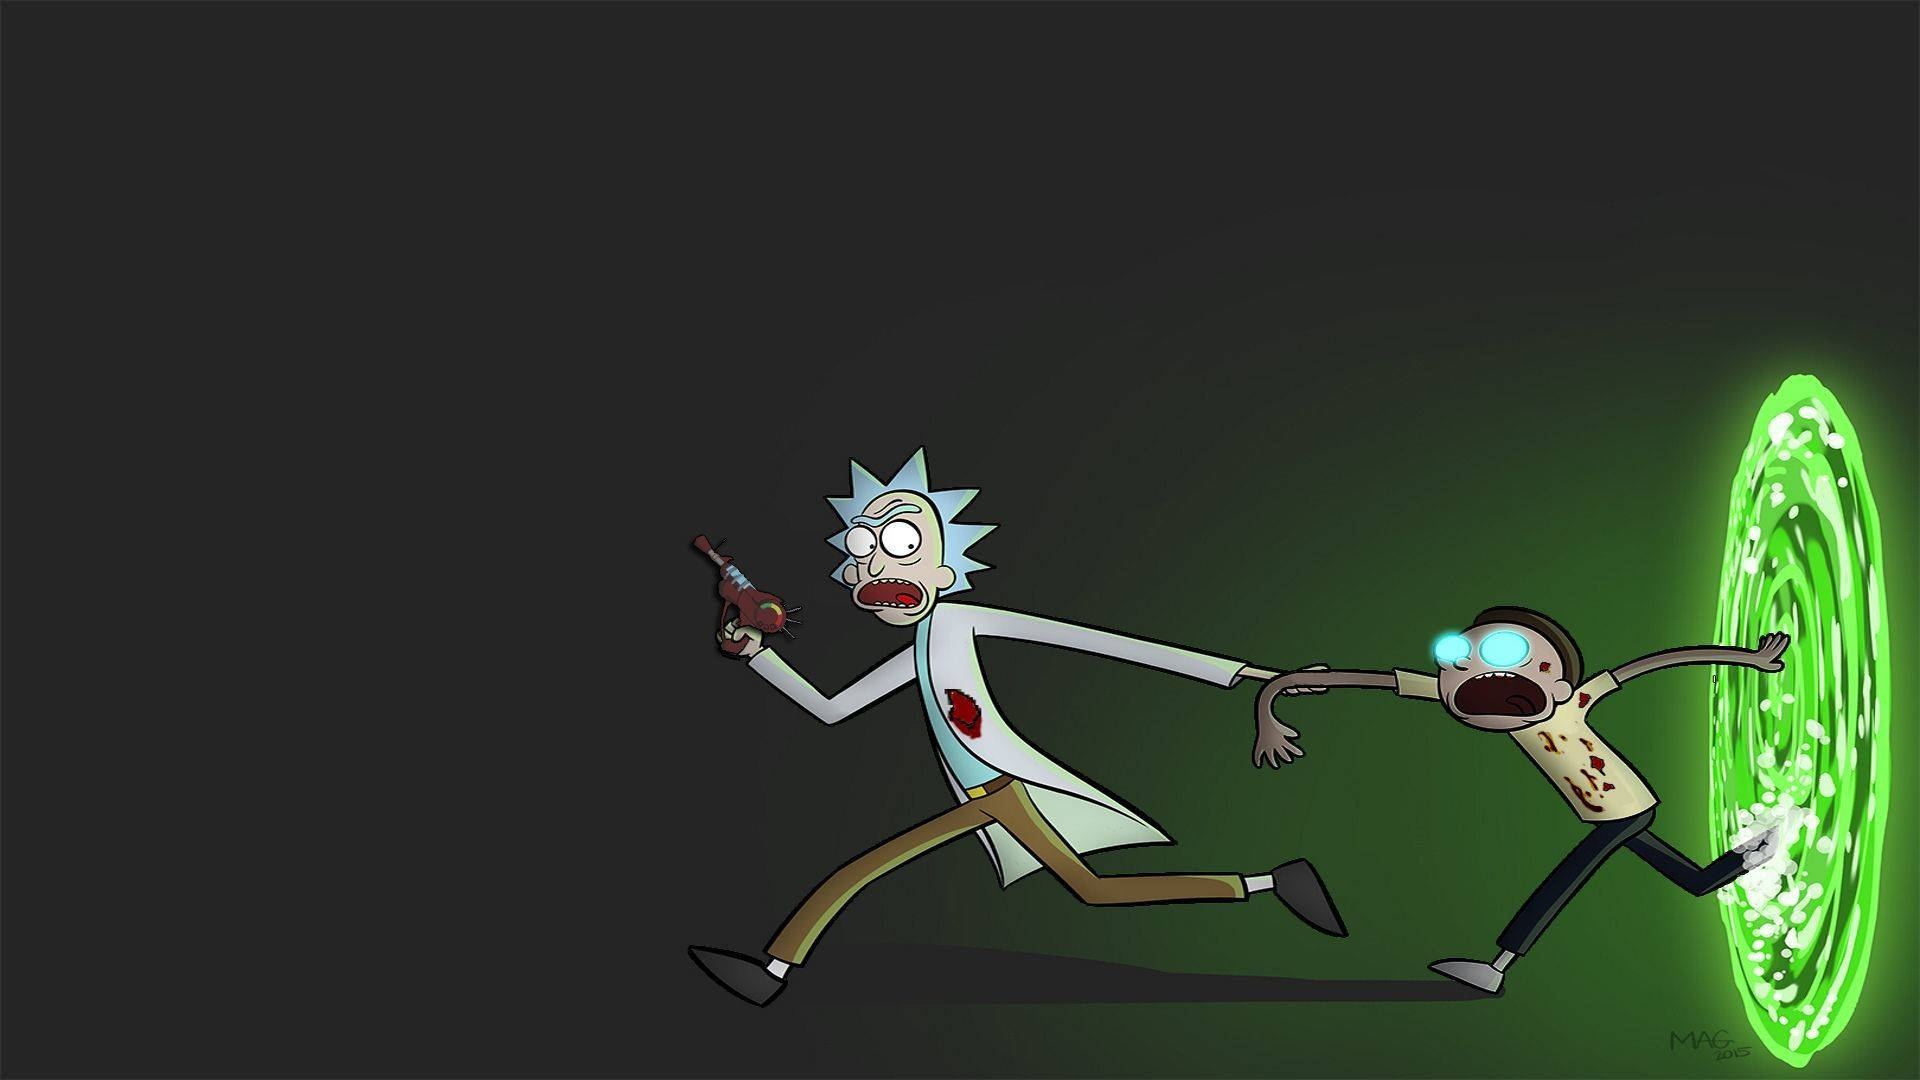 Travel Through Time and Space with Rick and Morty! Wallpaper